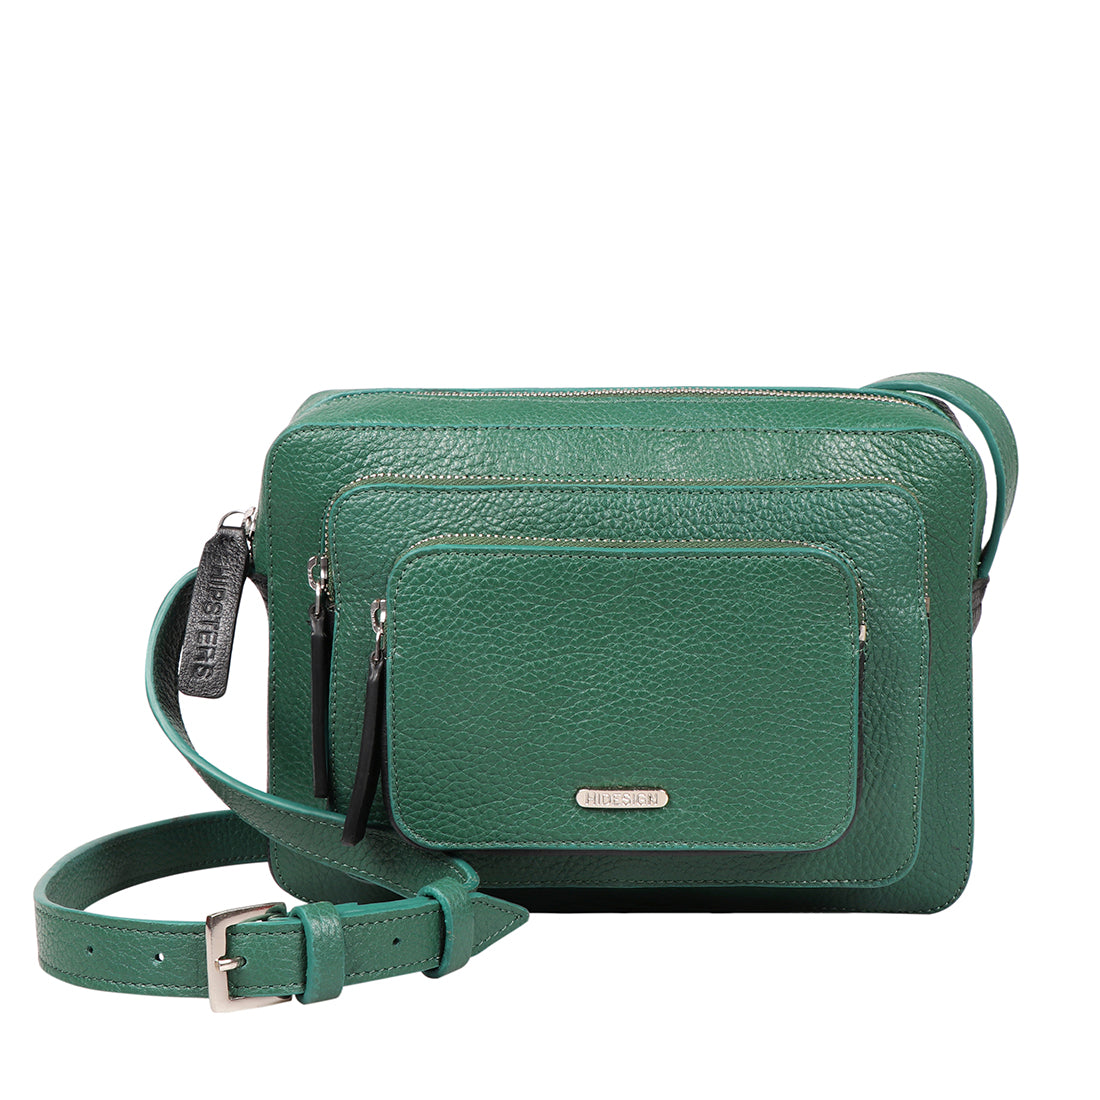 Shop Leather Sling Bags for Women Online at Hidesign